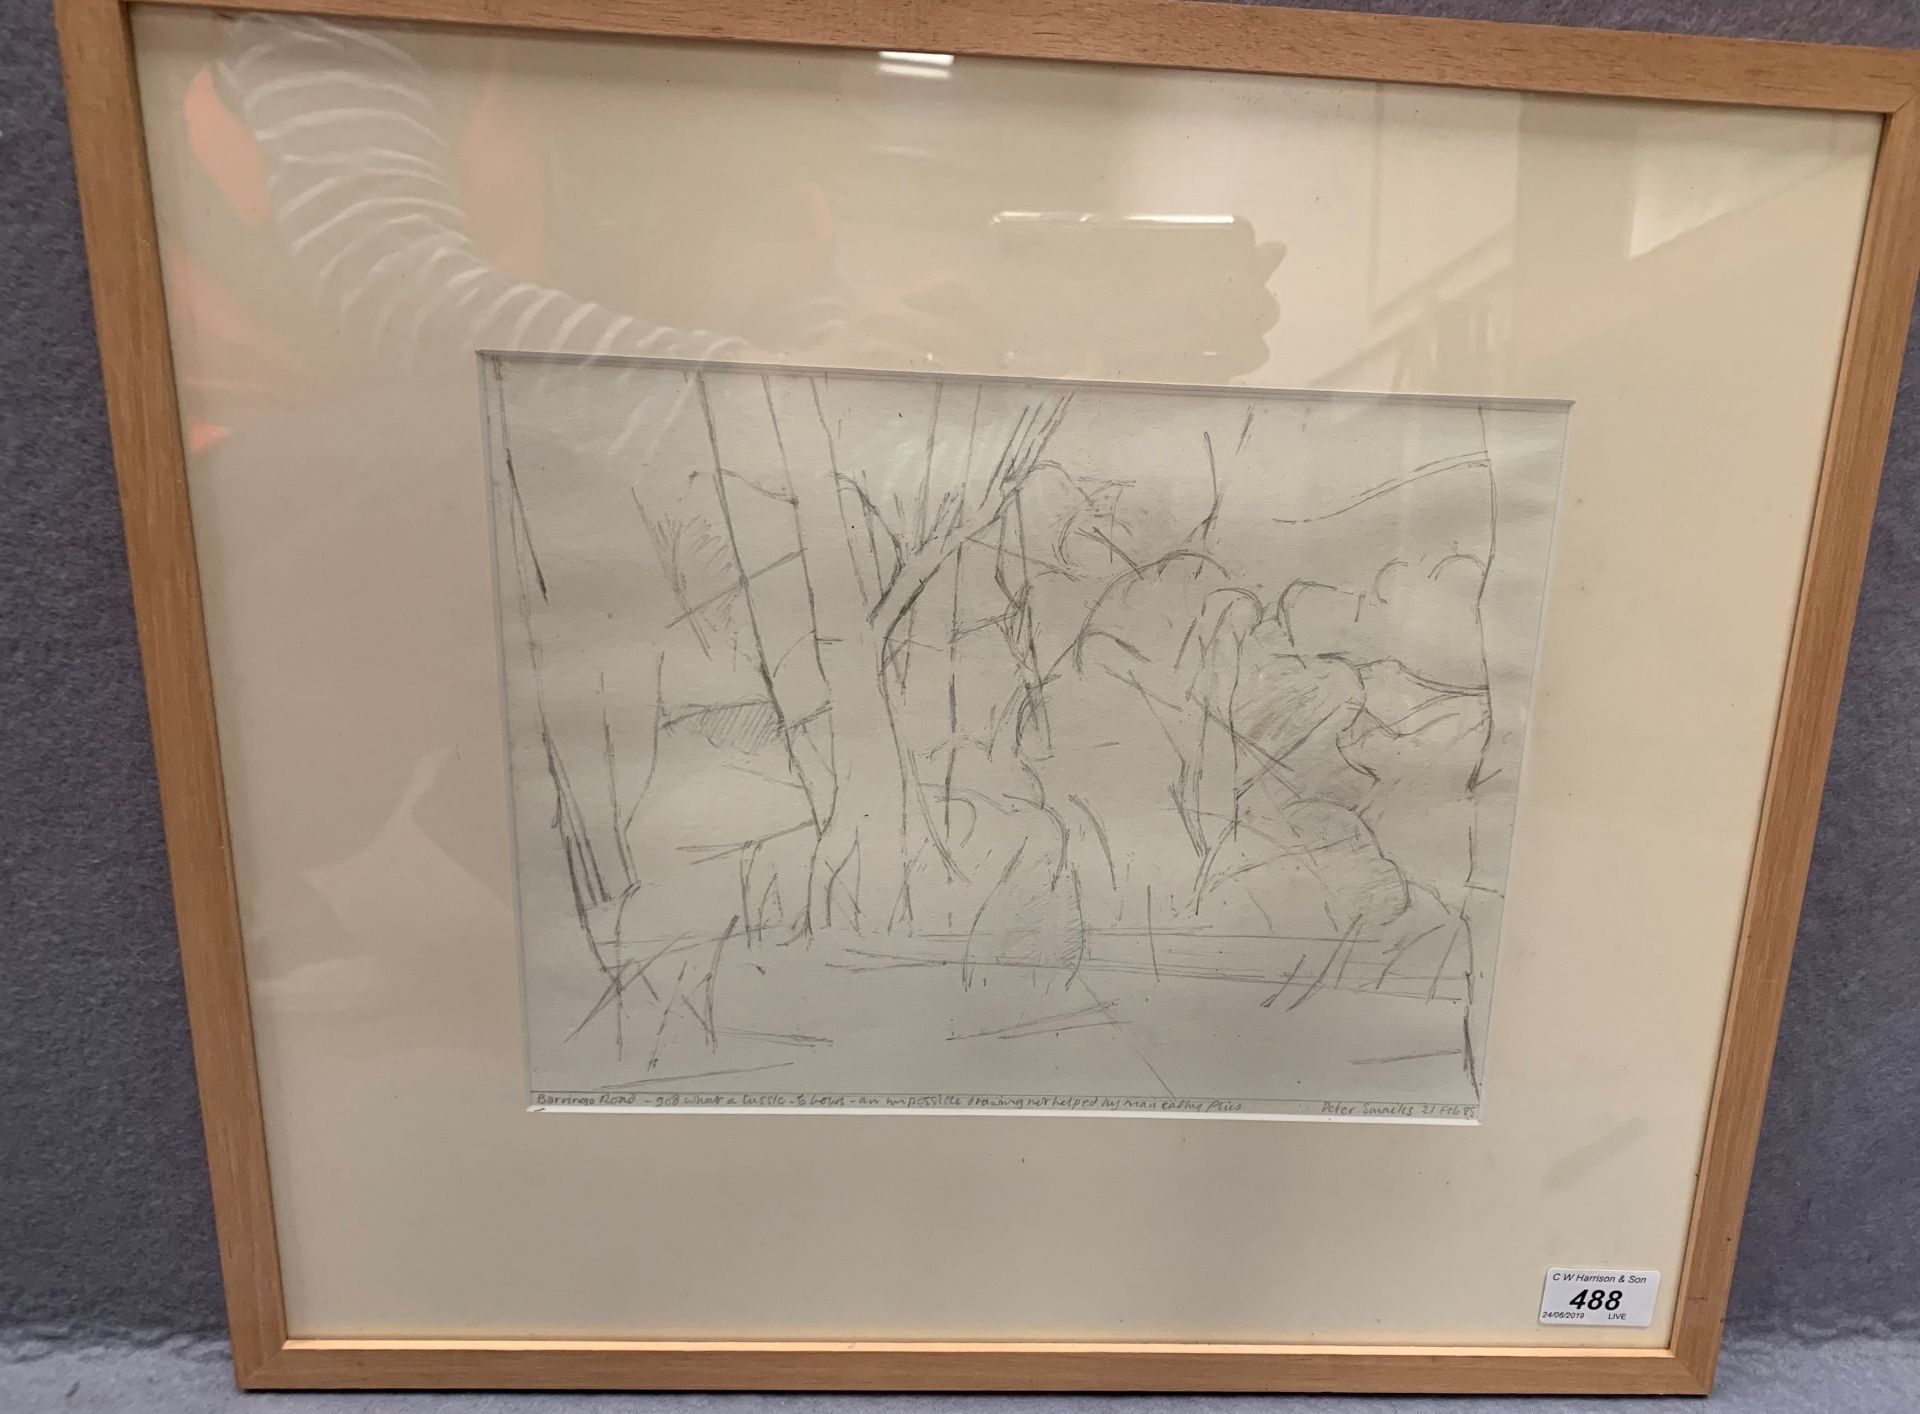 Peter Smailes framed pencil study 'Barringo Road - God what a tussle - 6 hours - an impossible